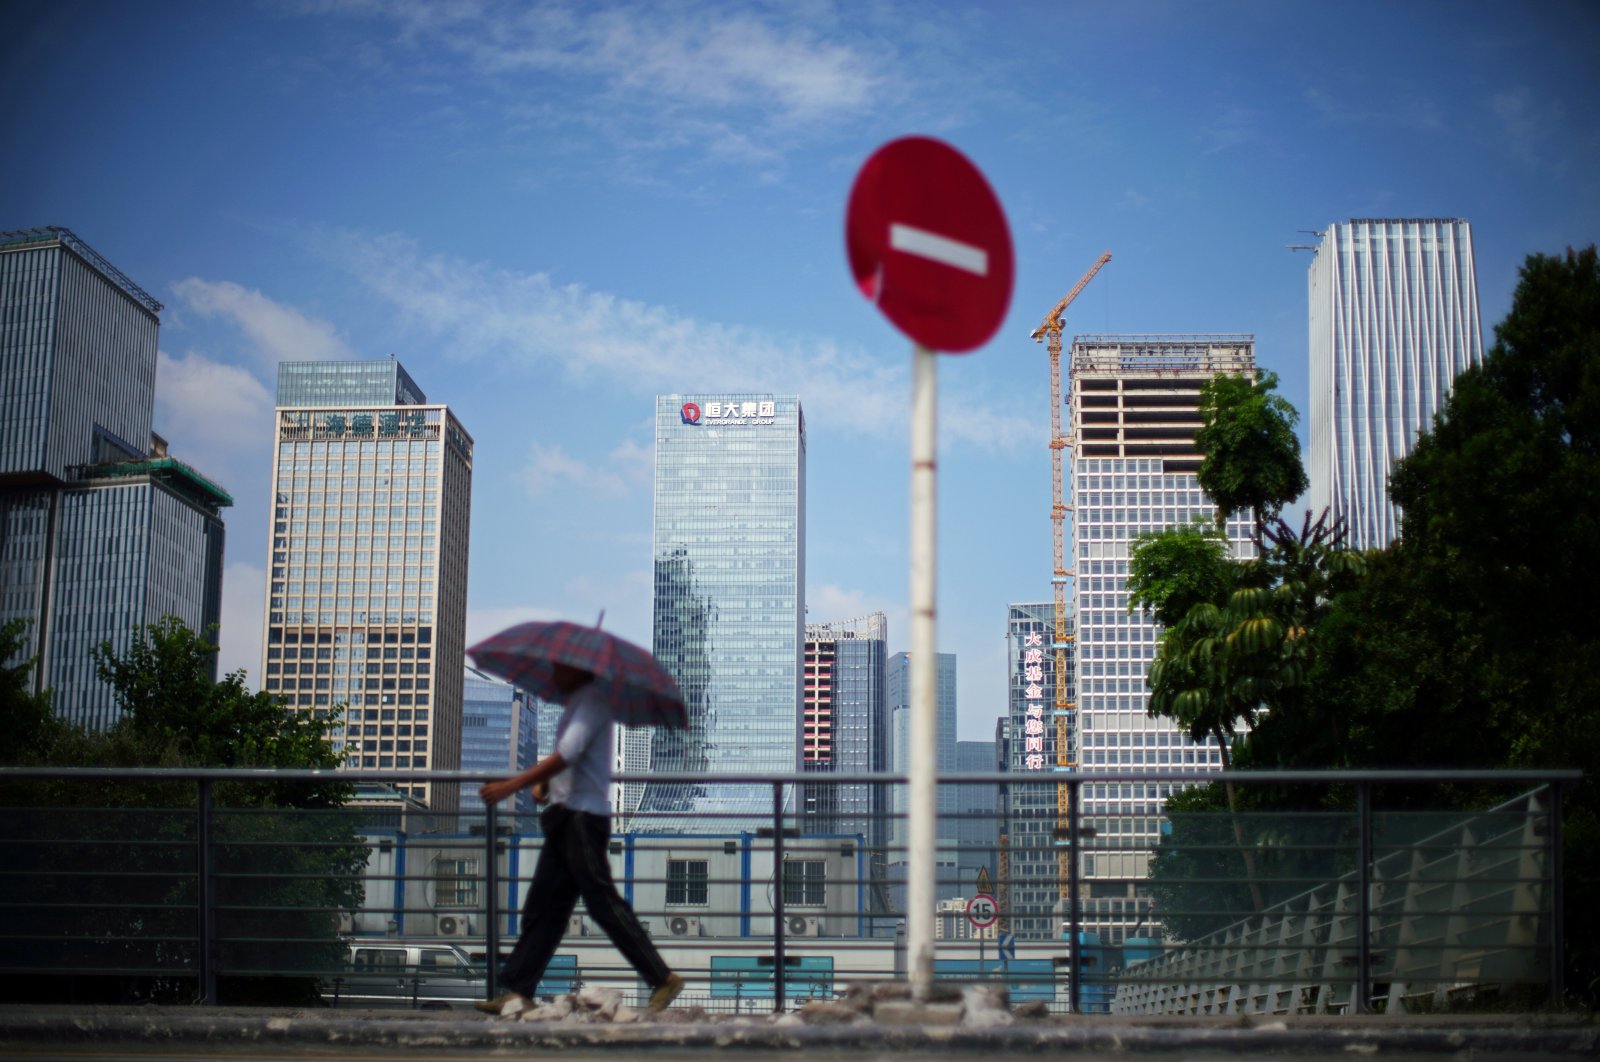 A man walks past a No Entry traffic sign near the headquarters of China Evergrande Group in Shenzhen, Guangdong province, China, Sept. 26, 2021. (Reuters Photo)